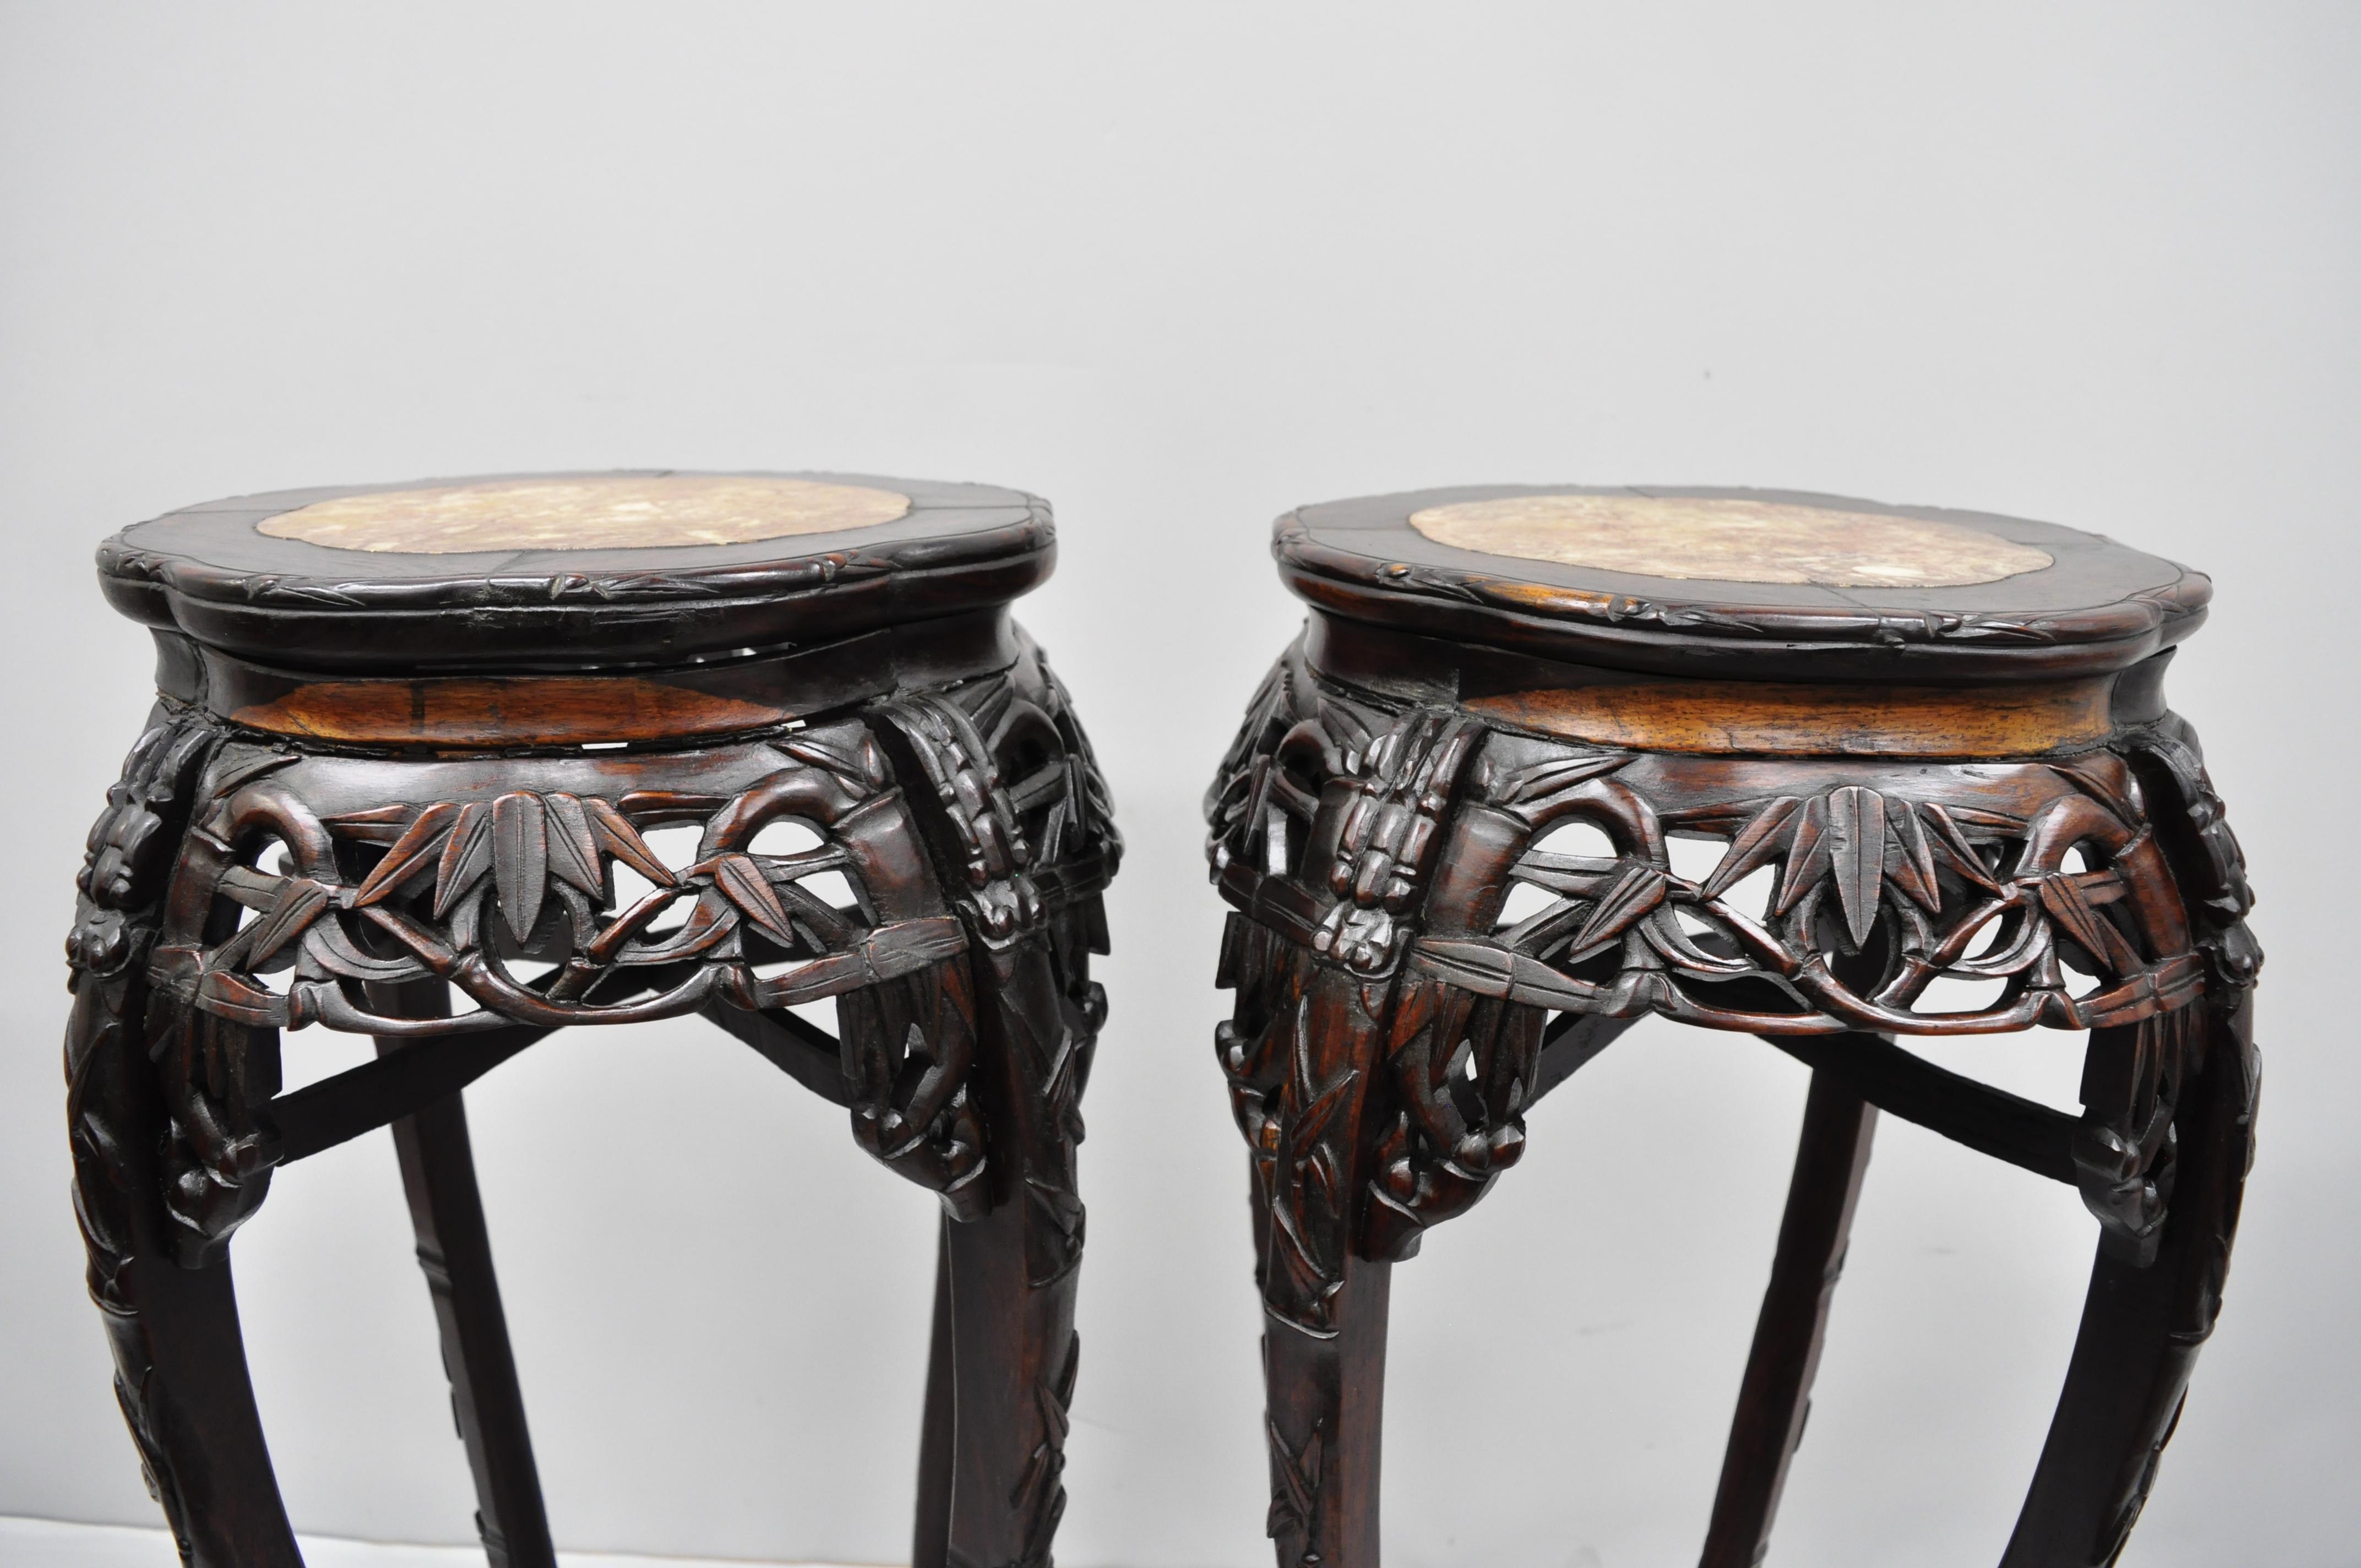 20th Century Pair of Carved Rosewood Marble-Top Oriental Pedestal Plant Stand Tables